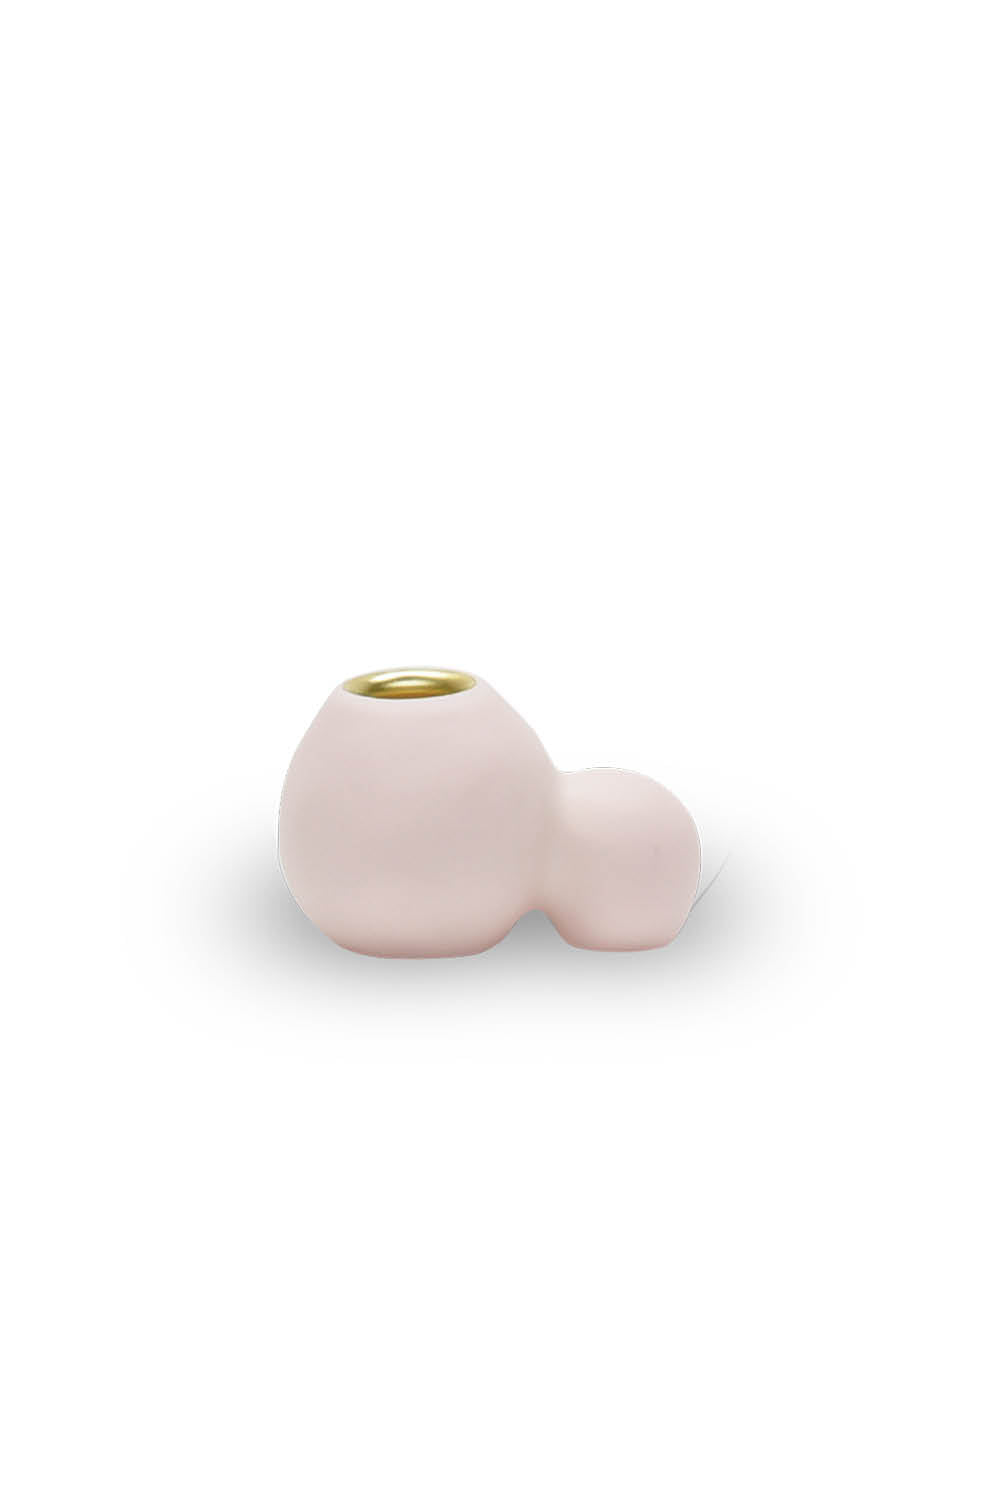 BUBBLE Petite Candleholder in Pale Rose